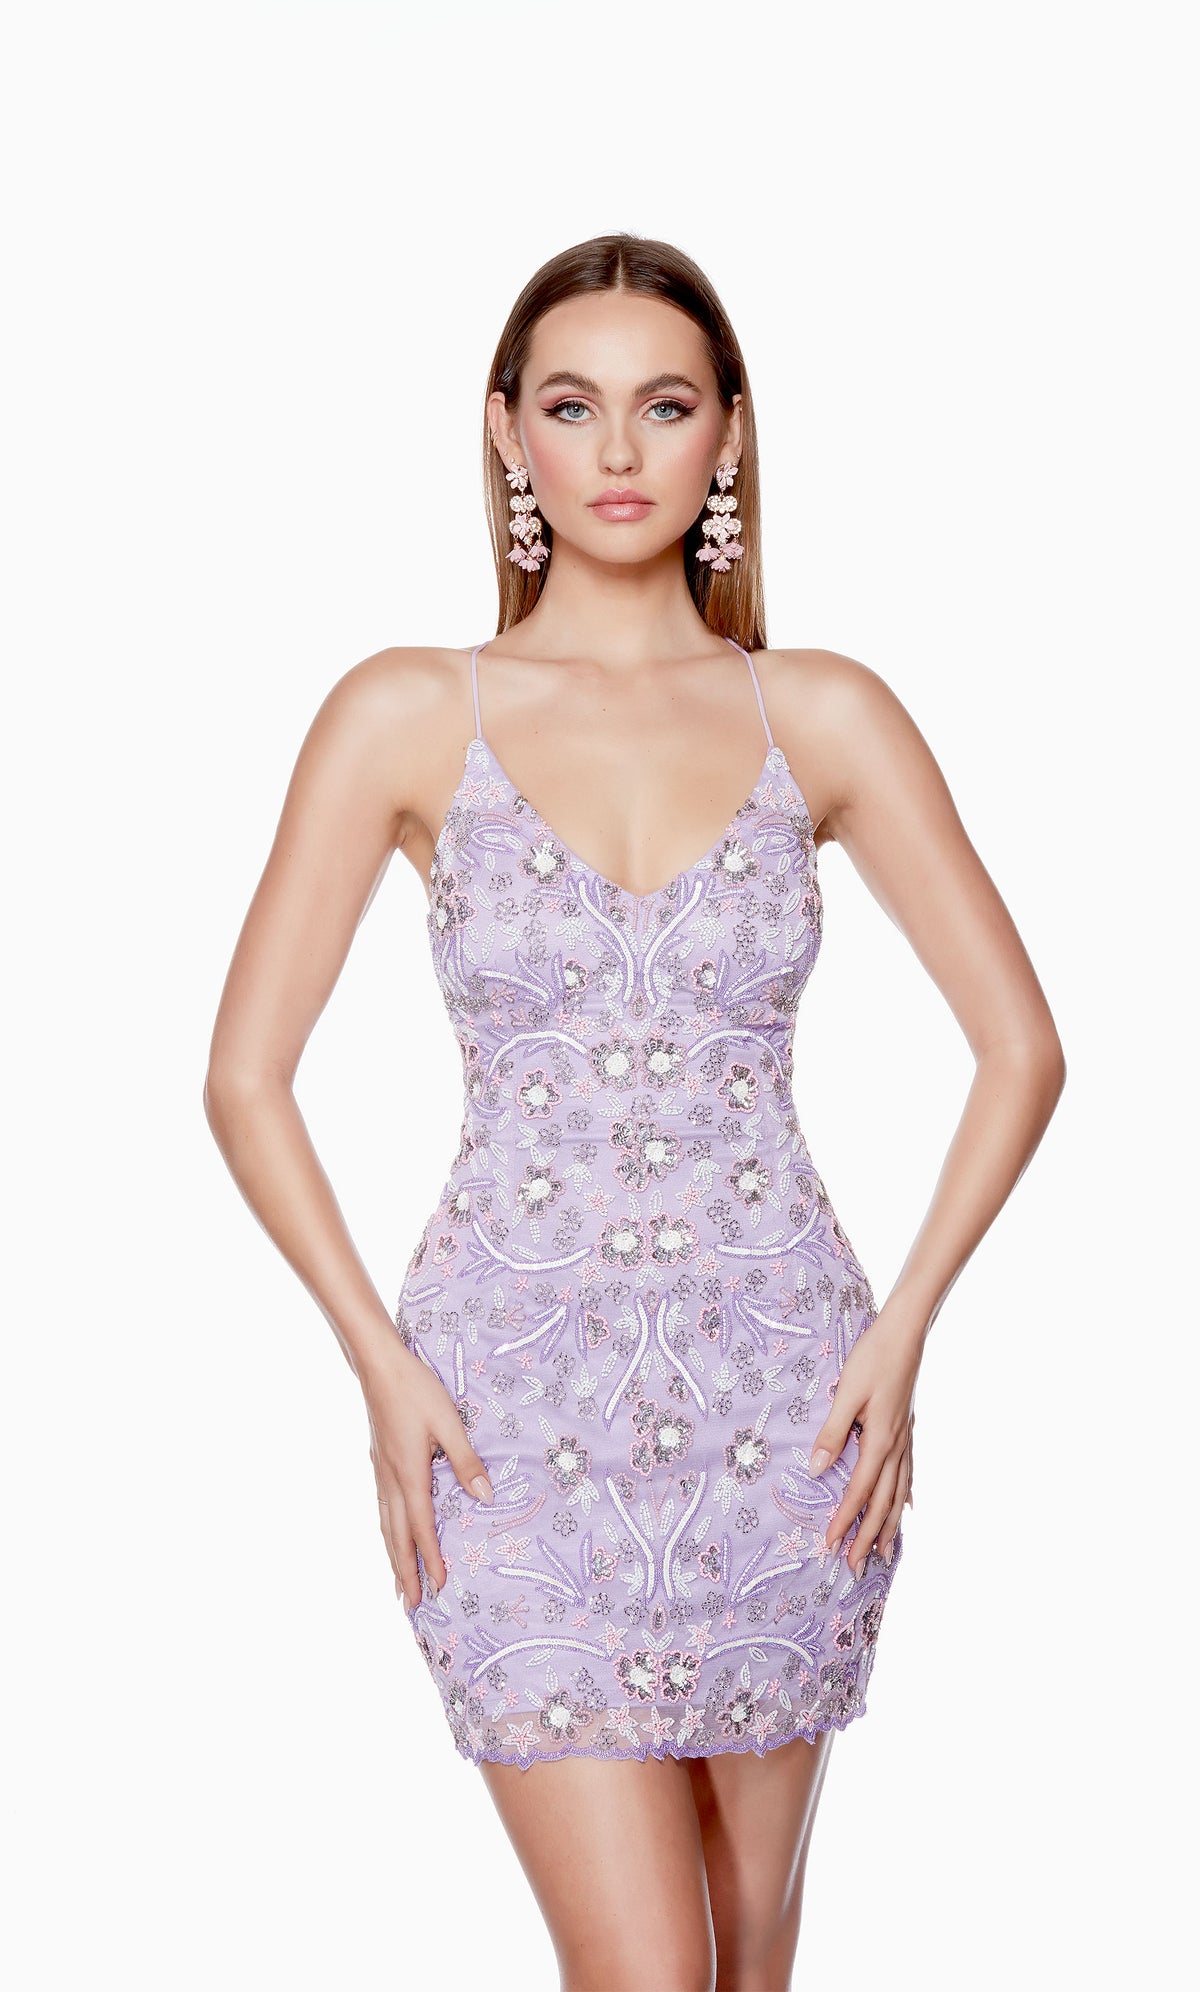 A lilac purple V-neck short homecoming dress beautifully hand beaded in a boho floral pattern, crafted from pink, silver, and white beads. The back of the dress has a thin strap lace-up closure for a custom fit.